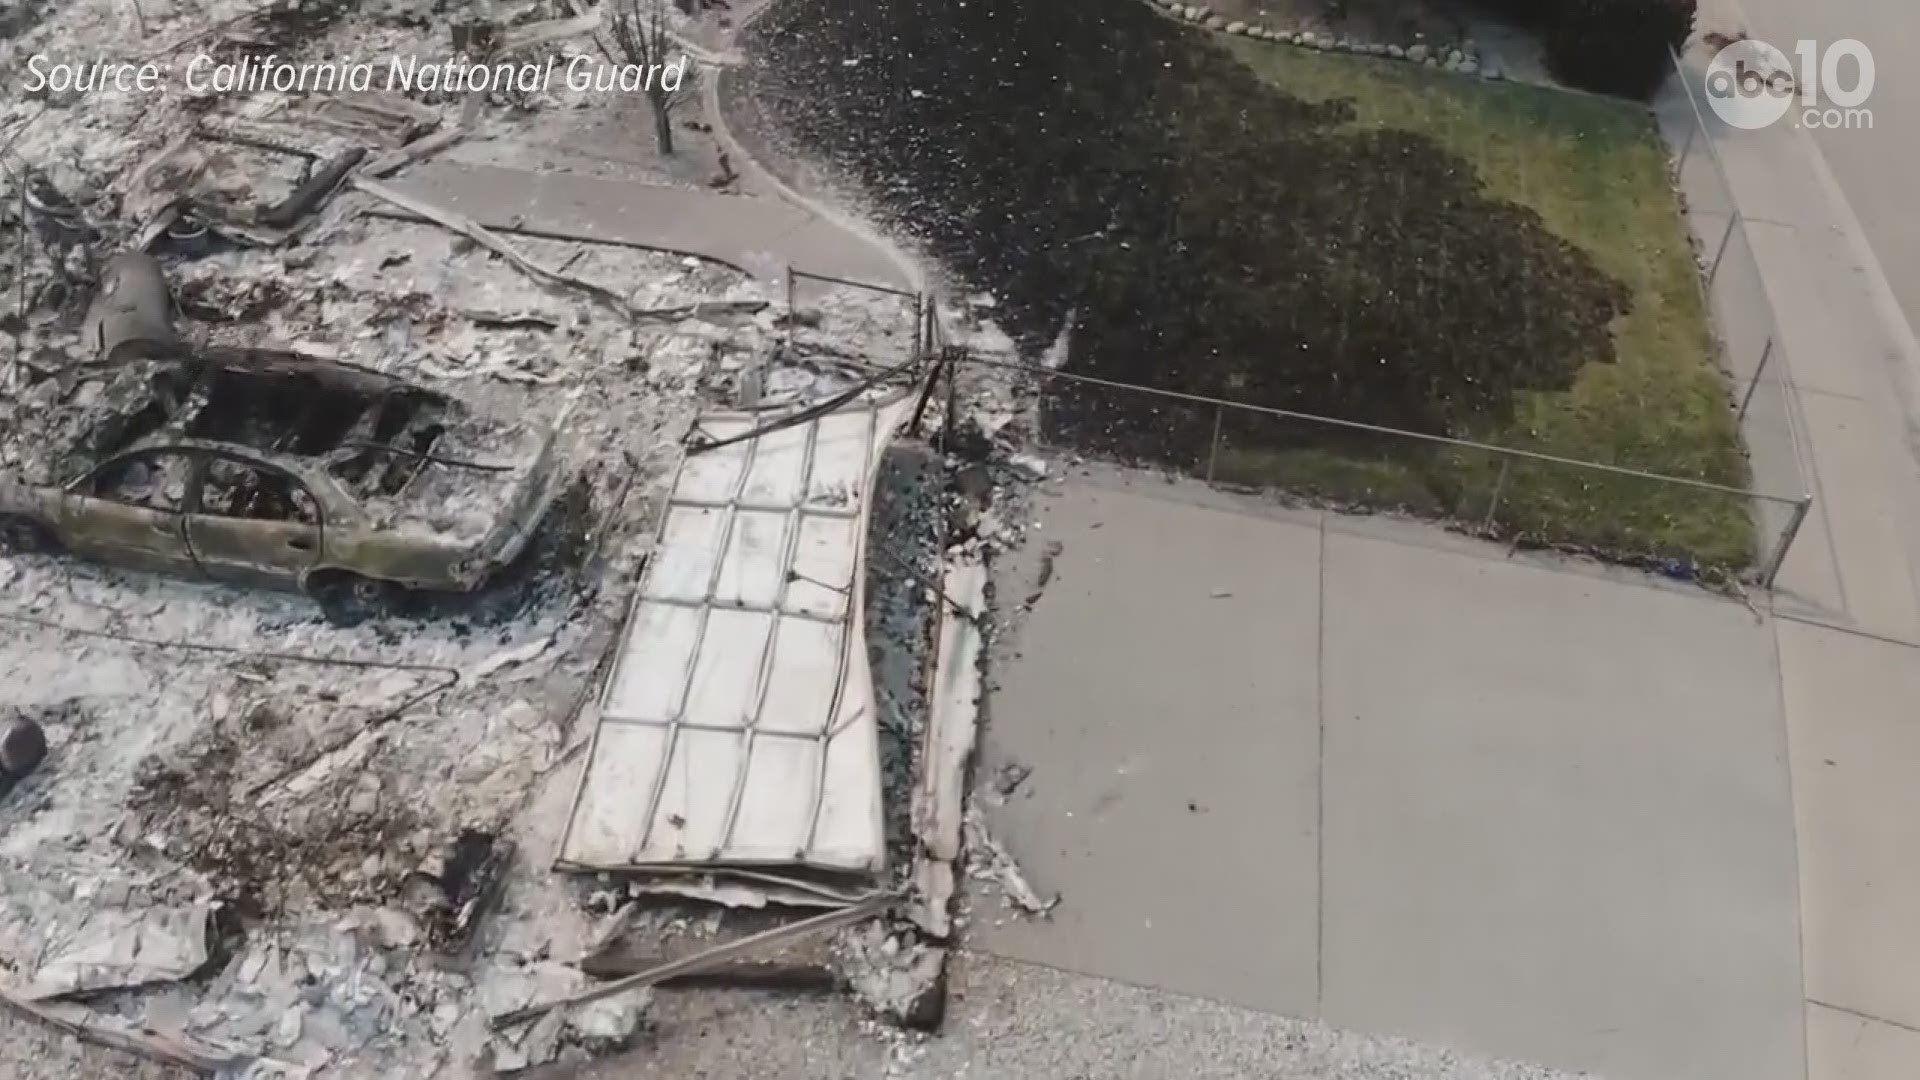 This drone video was recorded on Saturday, July 28, showing damage of the Carr Fire in the area of Keswick Dam Road and Menlo Street. (Source: California National Guard)